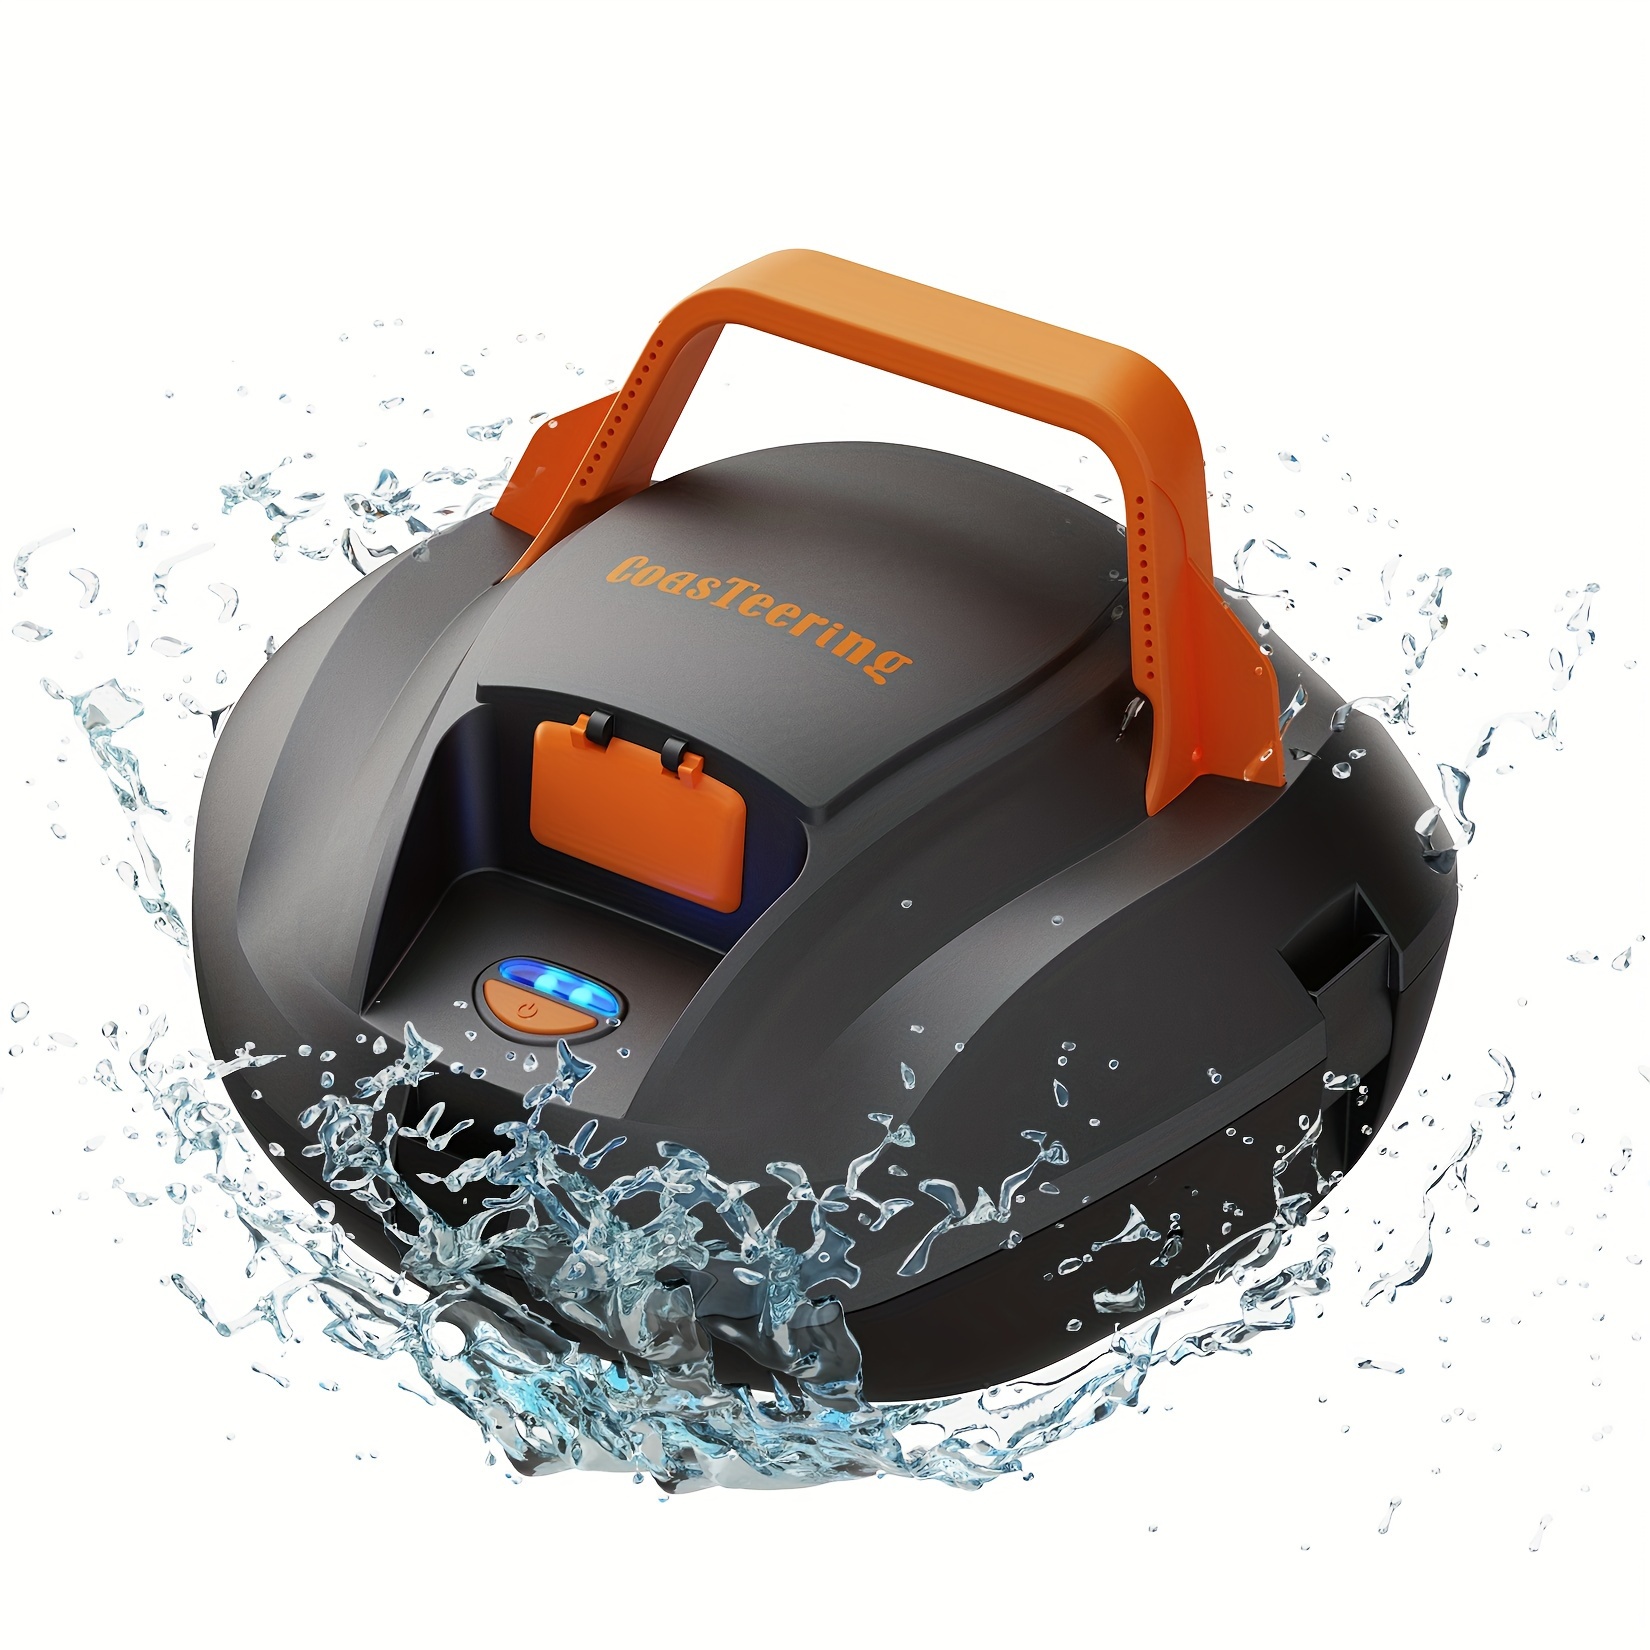 

Pool Vacuum Robot, Cordless Robotic Pool Cleaner With 100 Mins Runtime, Powerful Suction, Fast Charging, Self-parking, Ideal For Above Ground/inground Pools Up To 850 Sq.ft